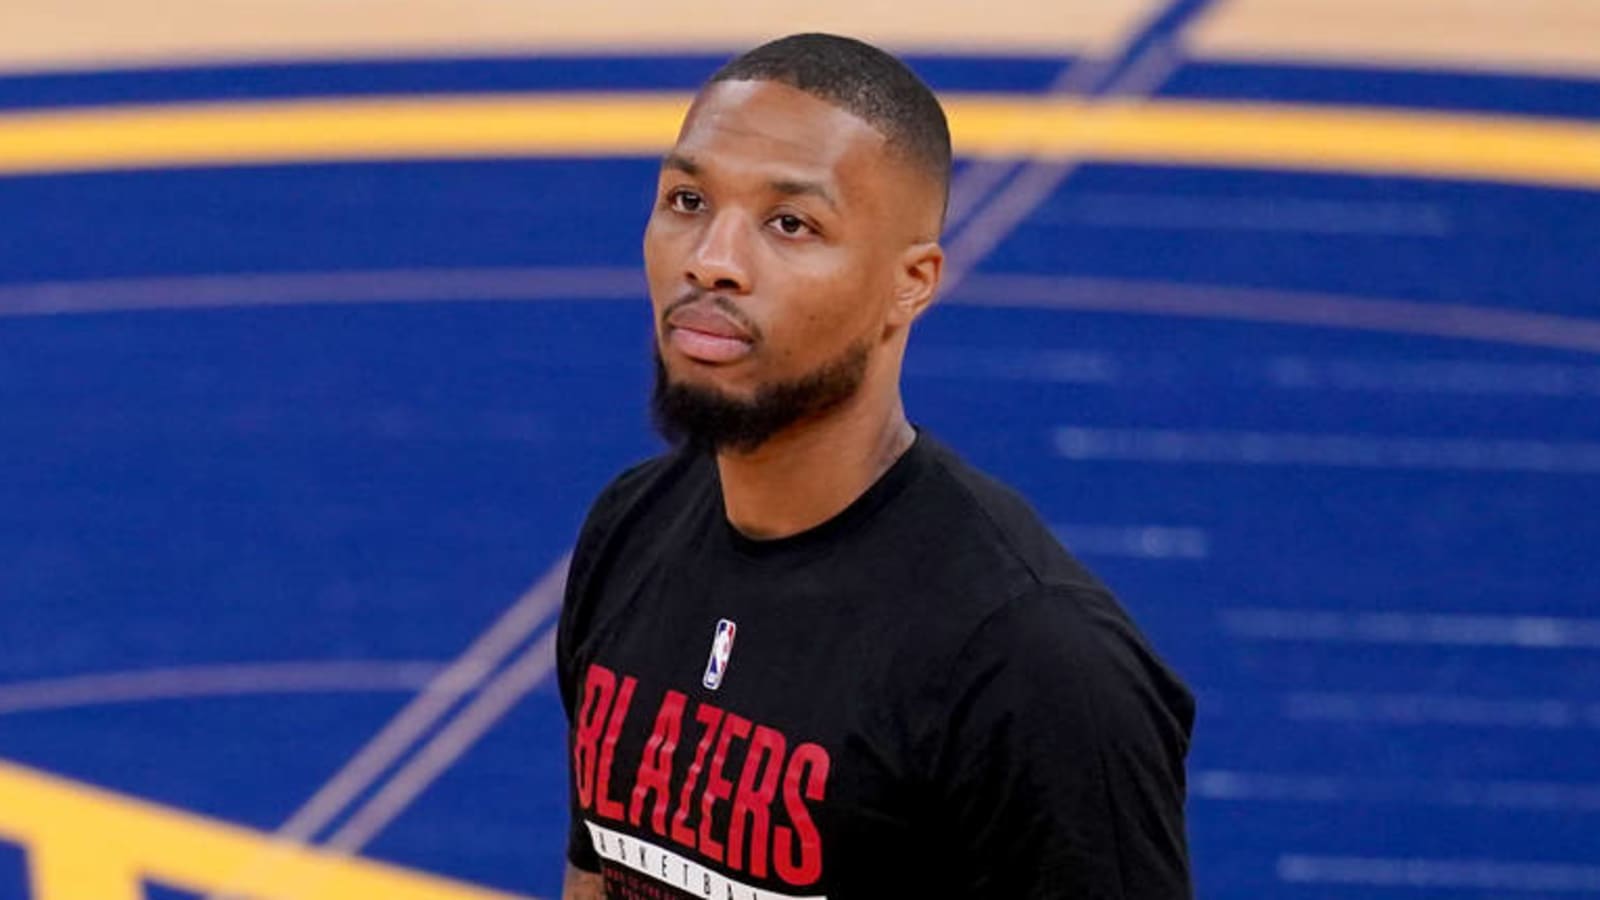 Damian Lillard offers assessment of Steph Curry's struggles